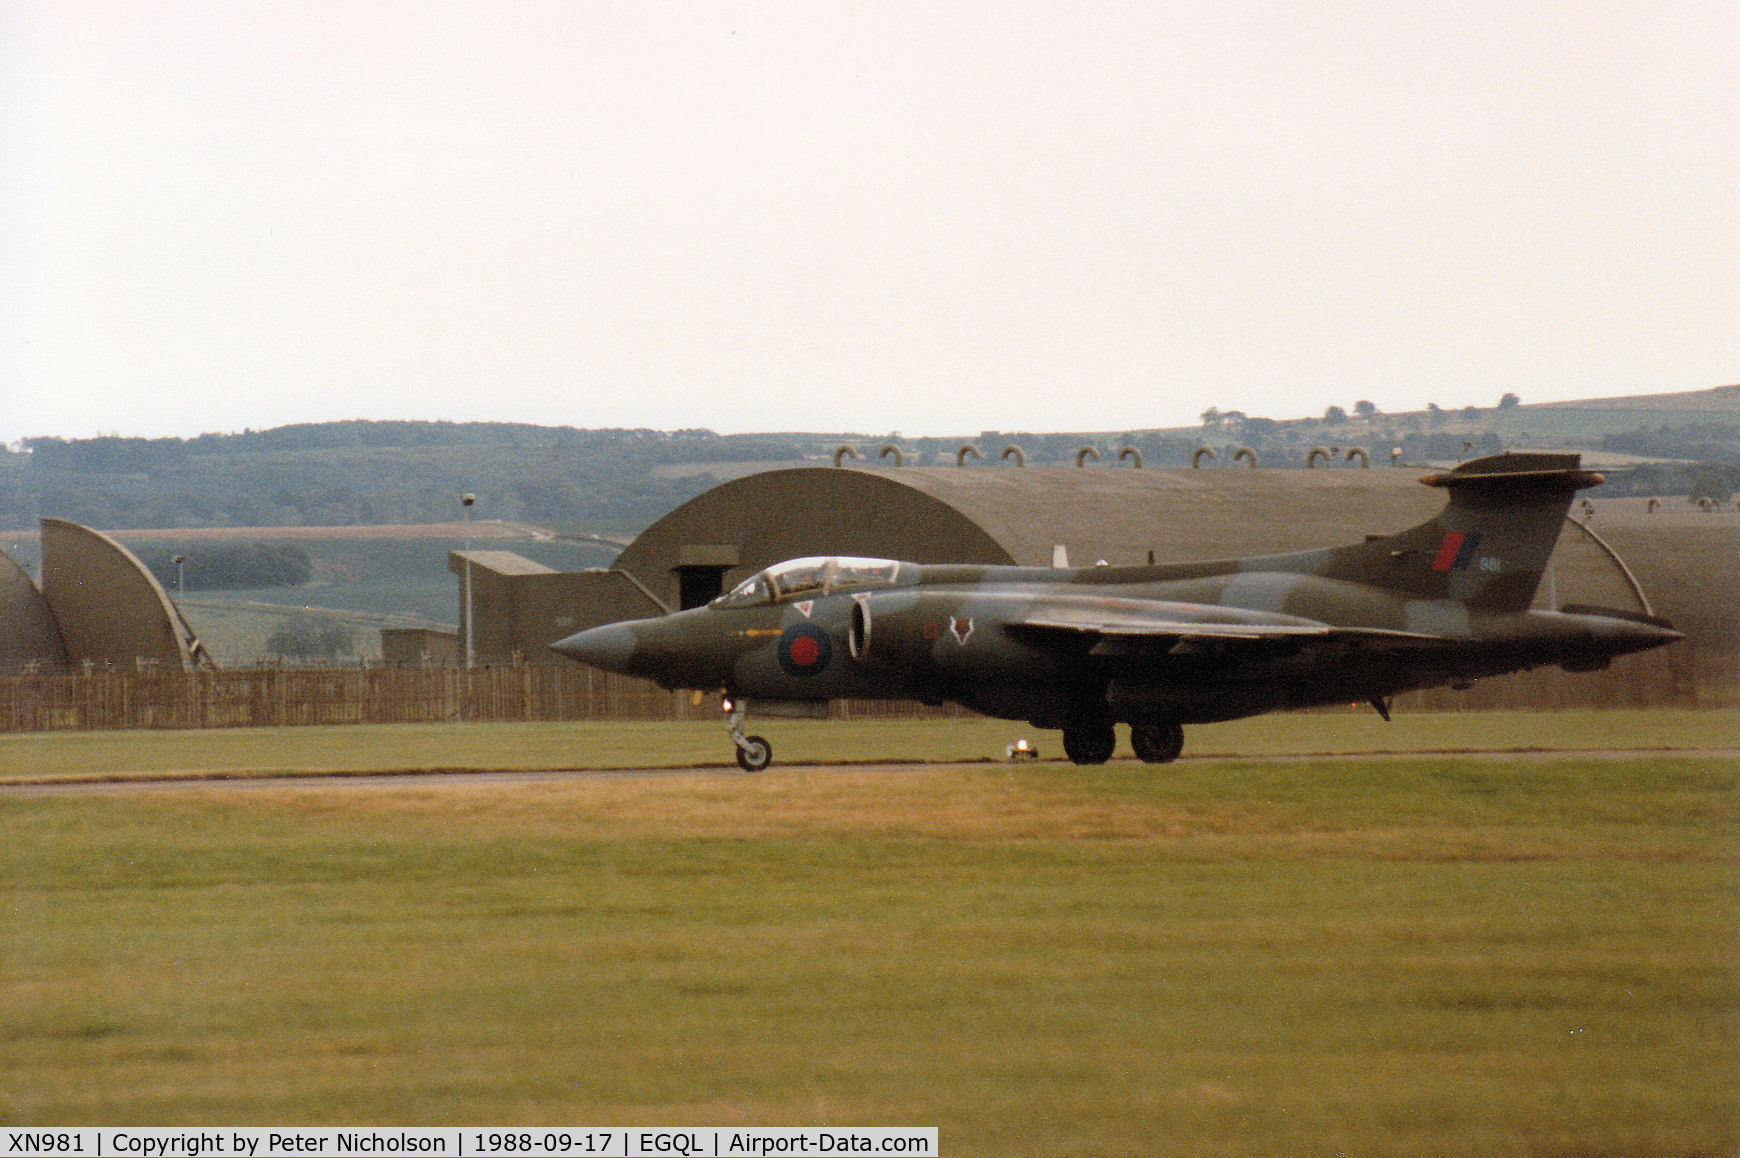 XN981, 1965 Hawker Siddeley Buccaneer S.2B C/N B3-08-63, Buccaneer S.2B of 12 Squadron at RAF Lossiemouth taxying to the active runway for display at the 1988 RAF Leuchars Airshow.